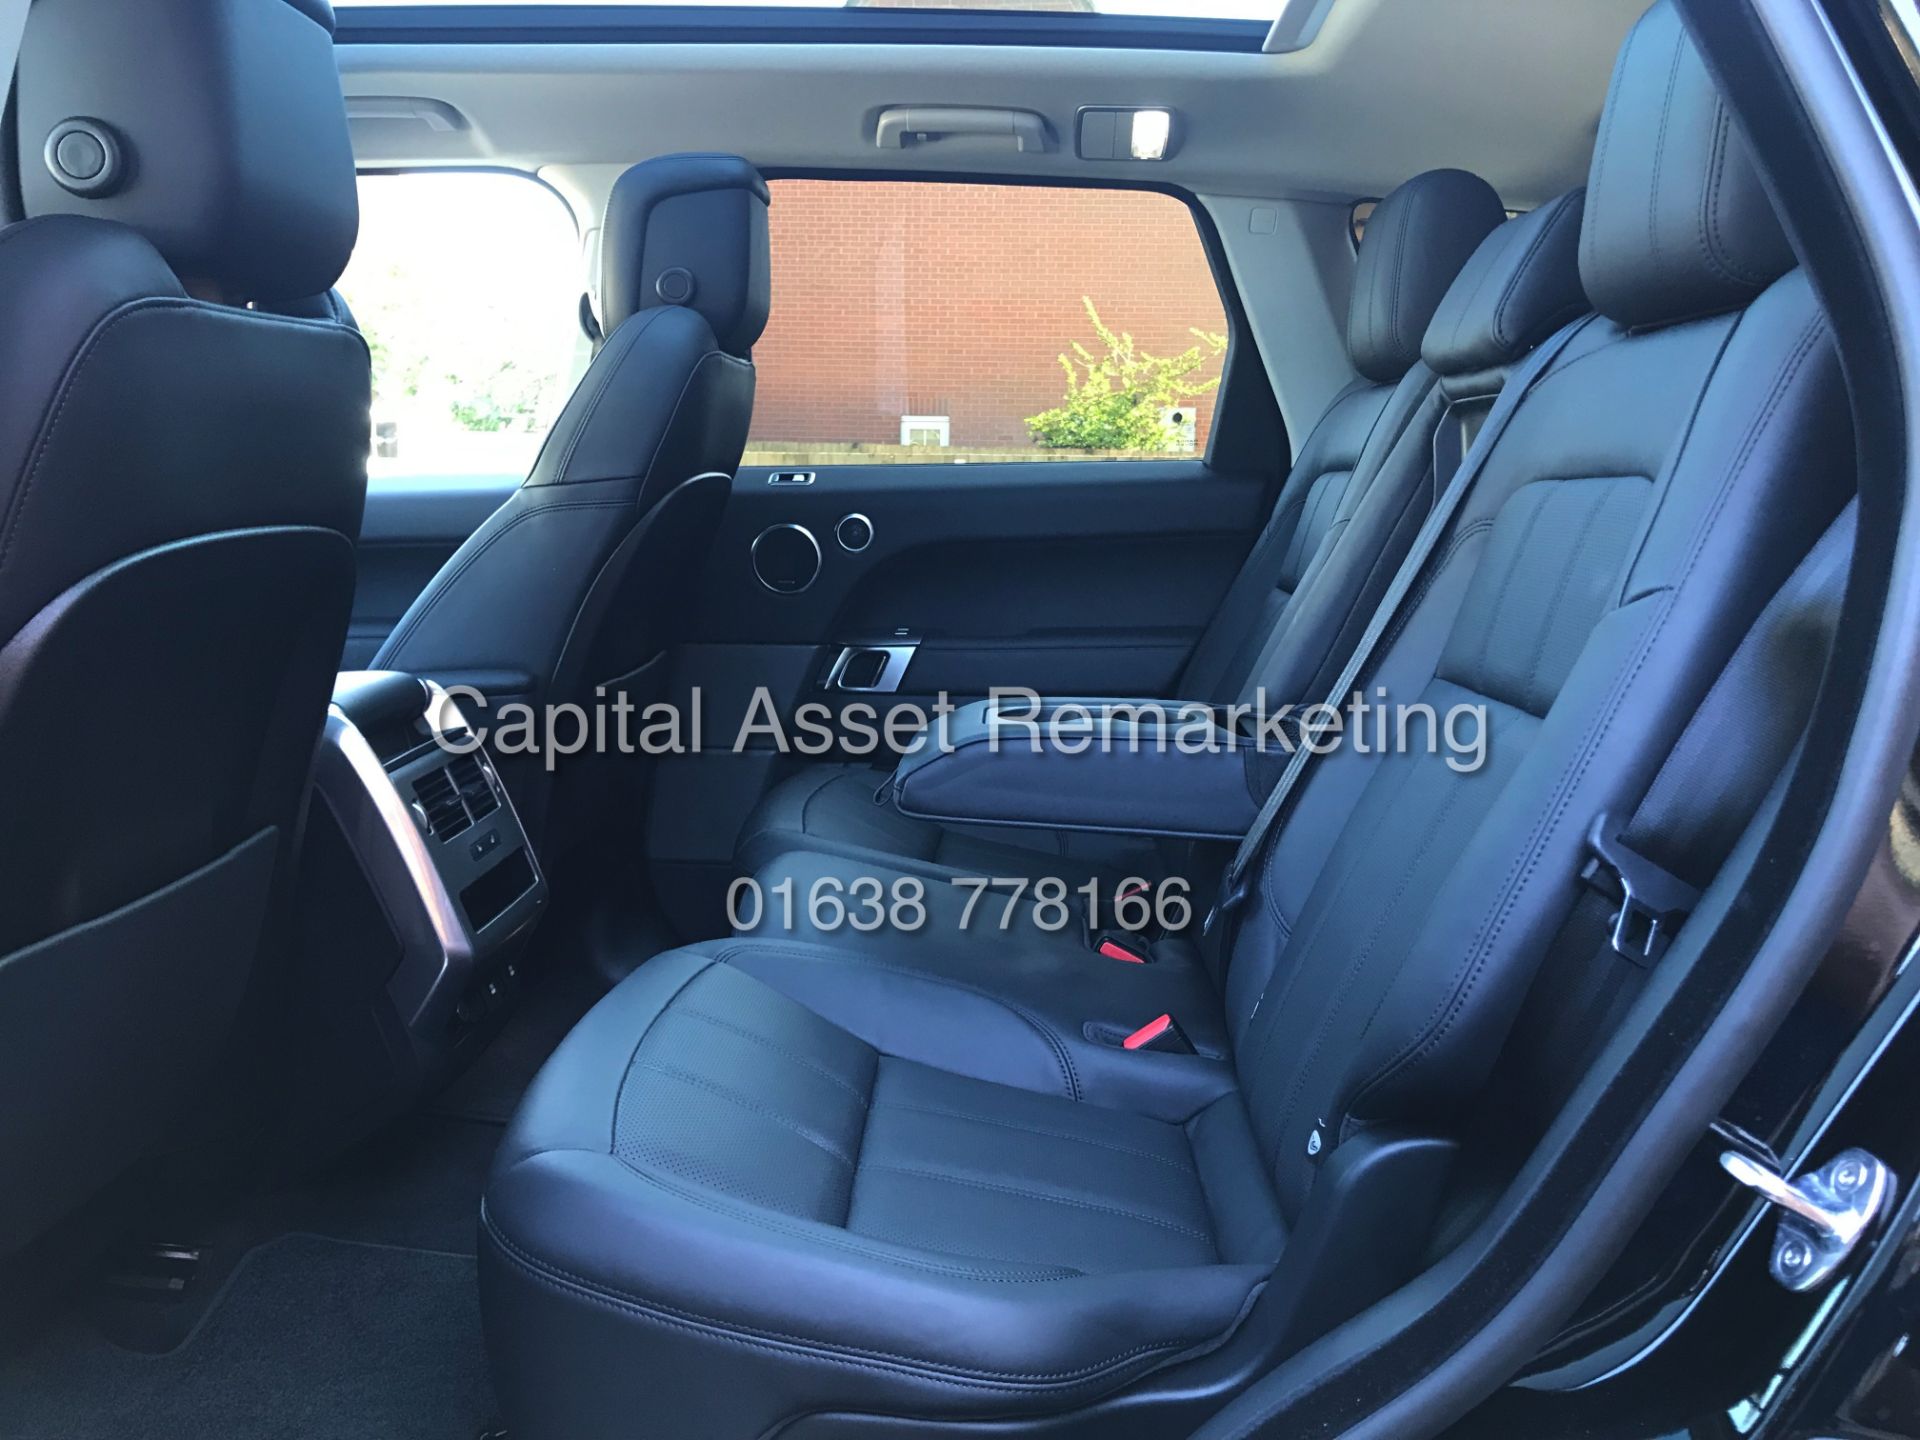 On Sale RANGE ROVER SPORT "HSE" 3.0 SDV6 AUTO (2019) FULLY LOADED - SAT NAV - PAN ROOF- FULL LEATHER - Image 35 of 35